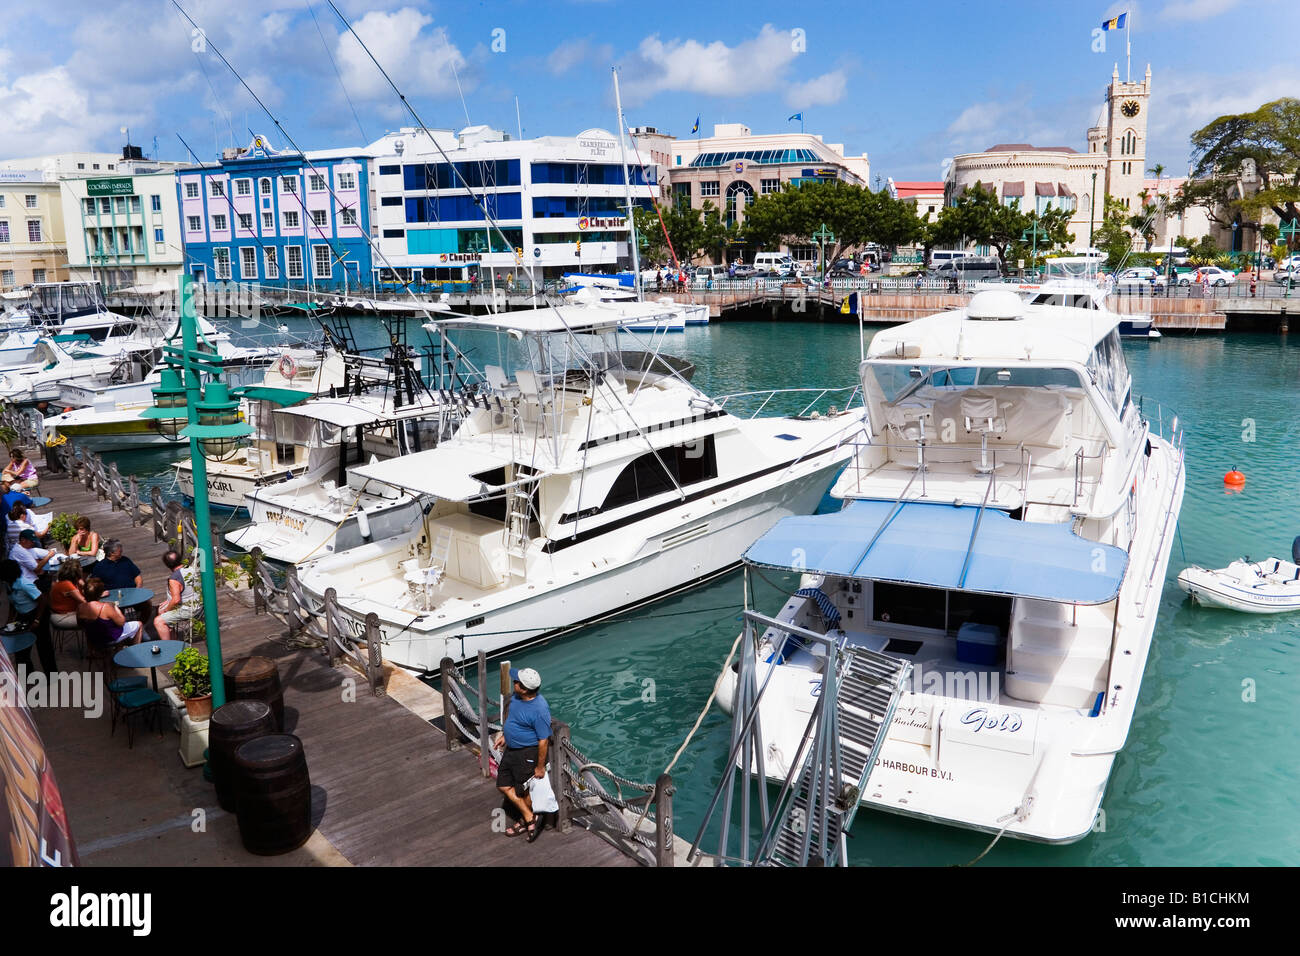 View over marina to parliament building in background Bridgetown Barbados Caribbean Stock Photo